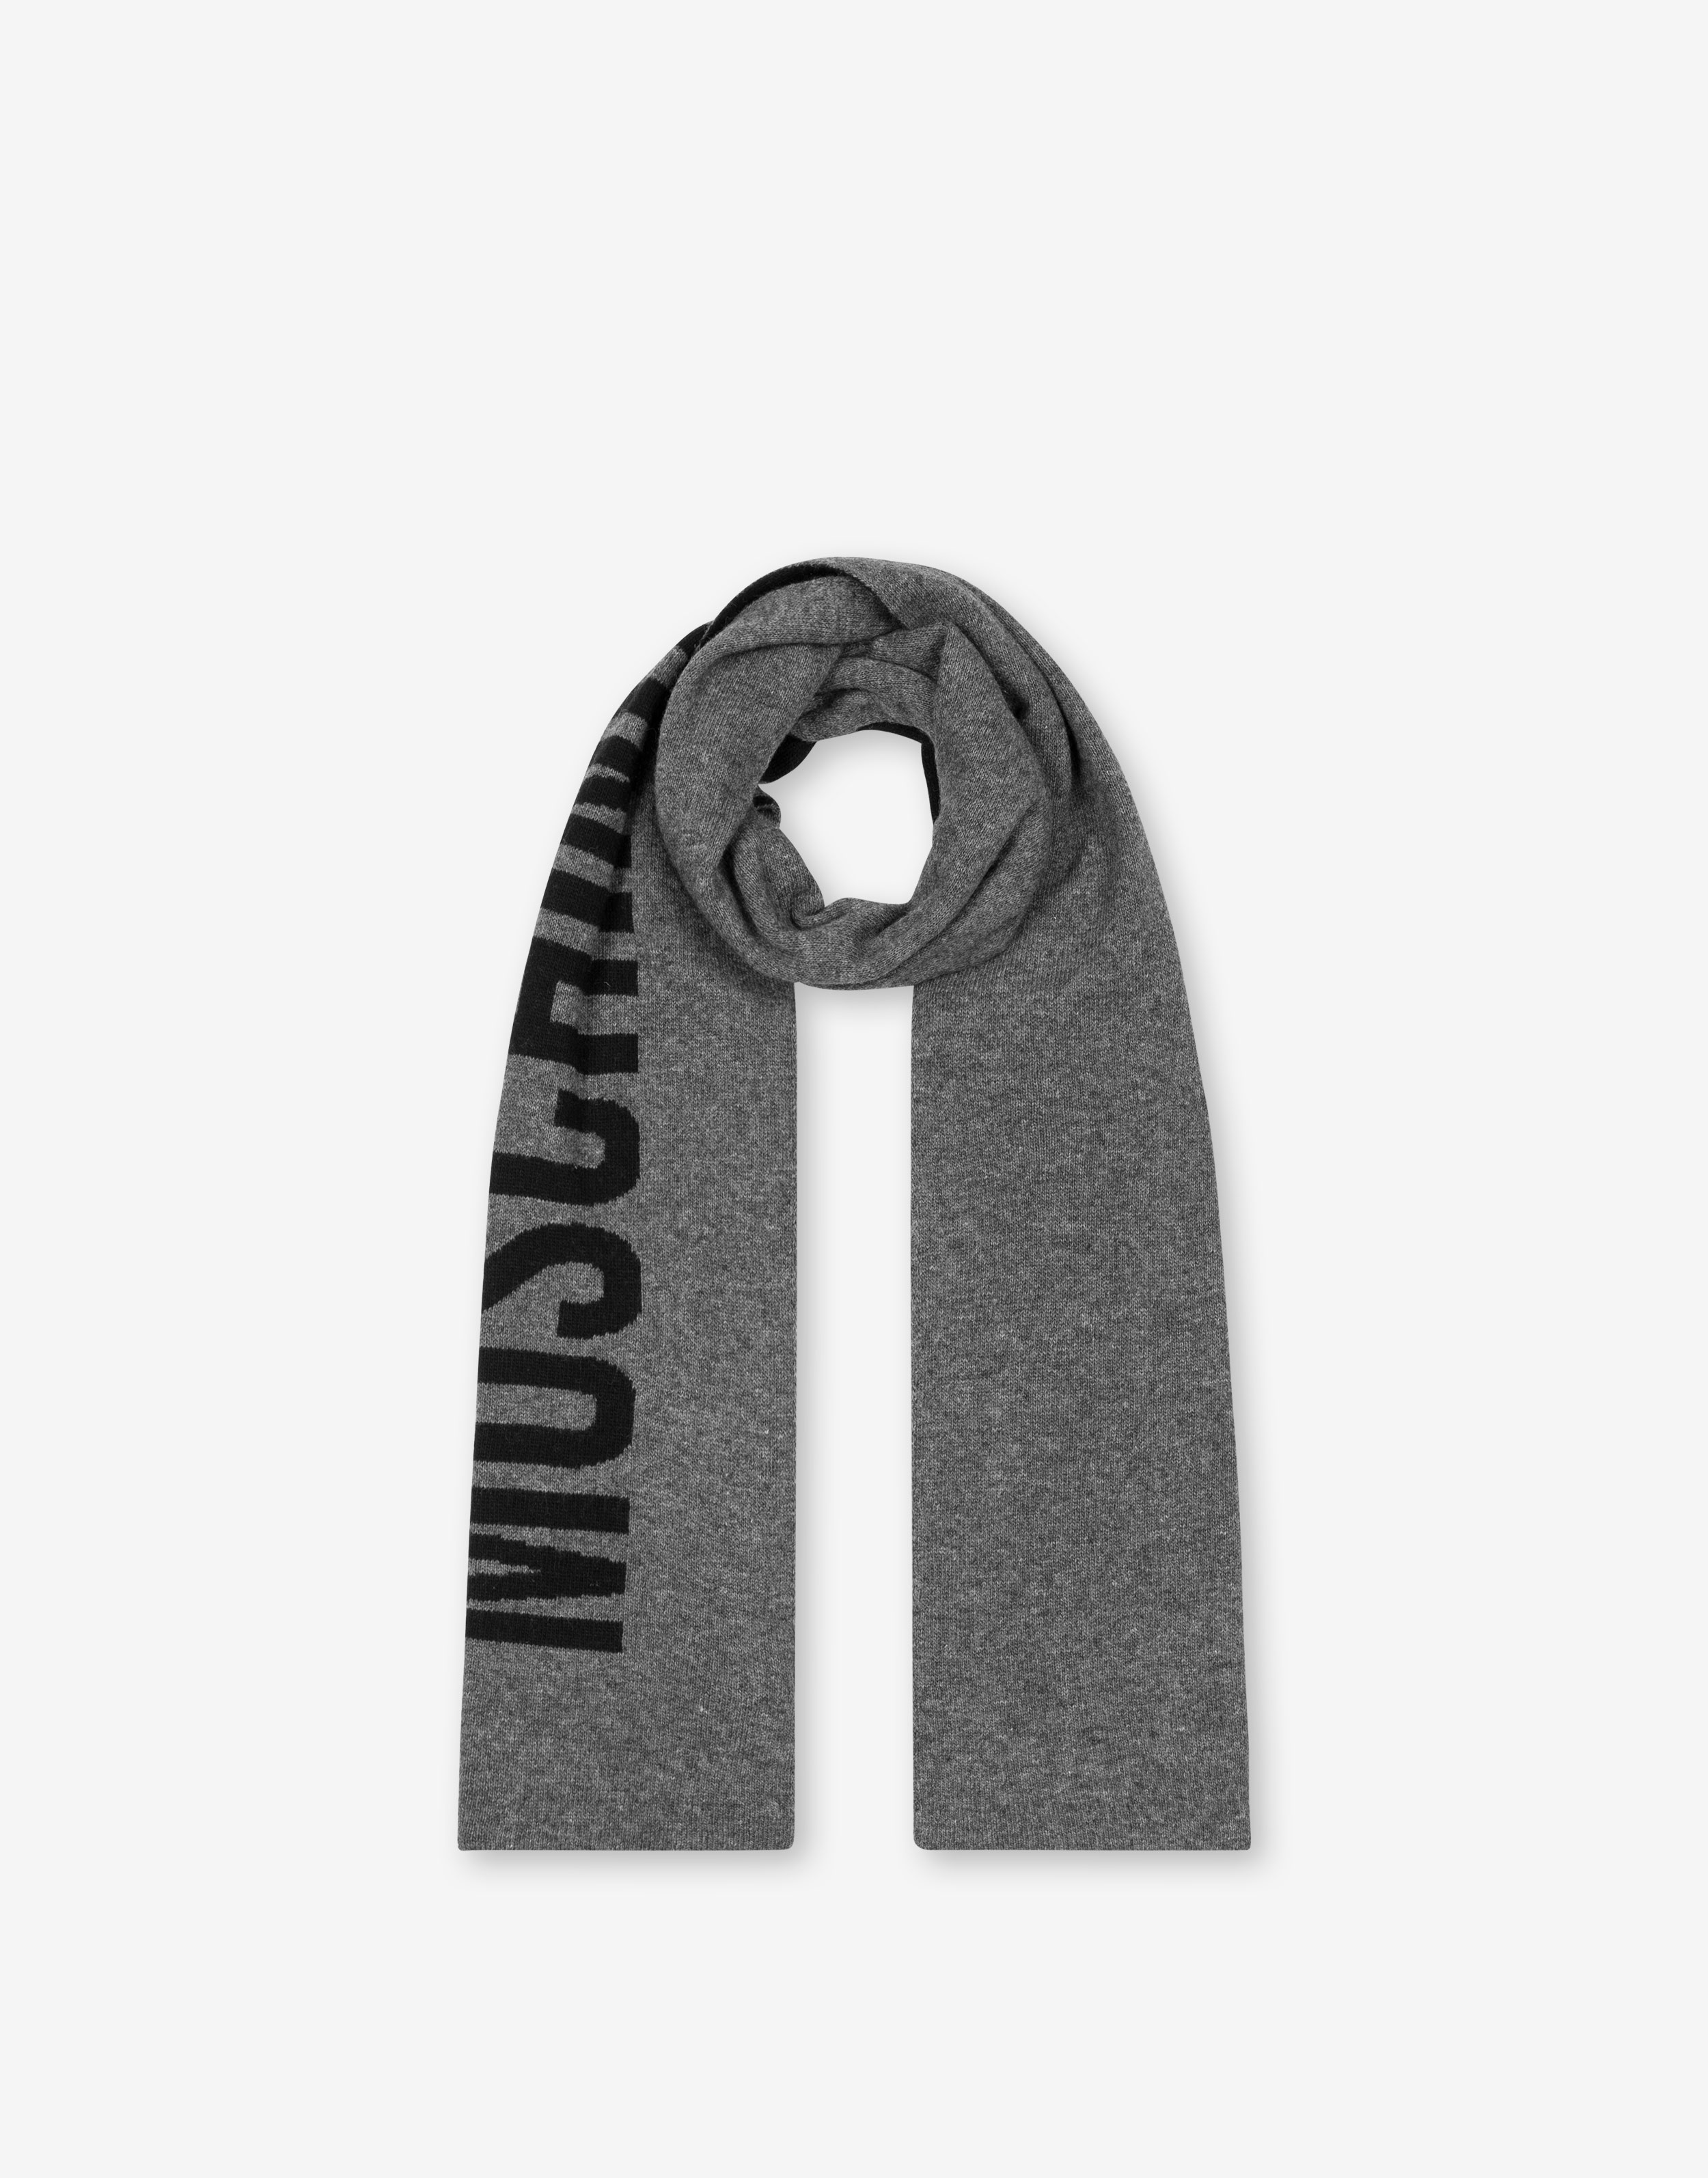 Moschino マフラー & スカーフ for メンズ - Official Store